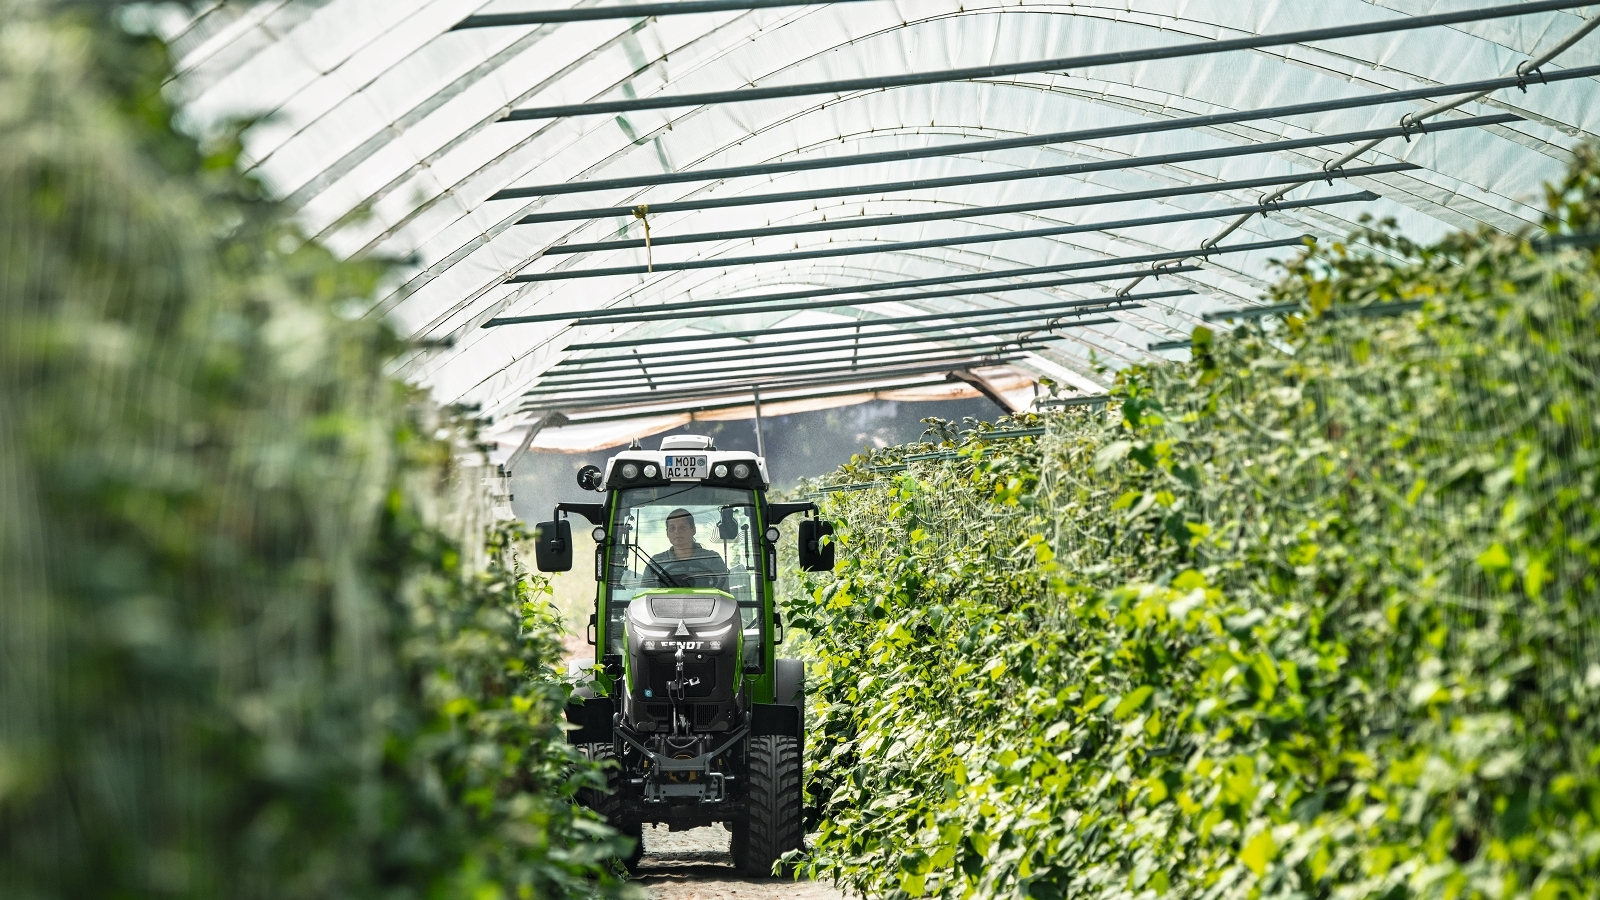 The Fendt e100 V Vario drives in a greenhouse